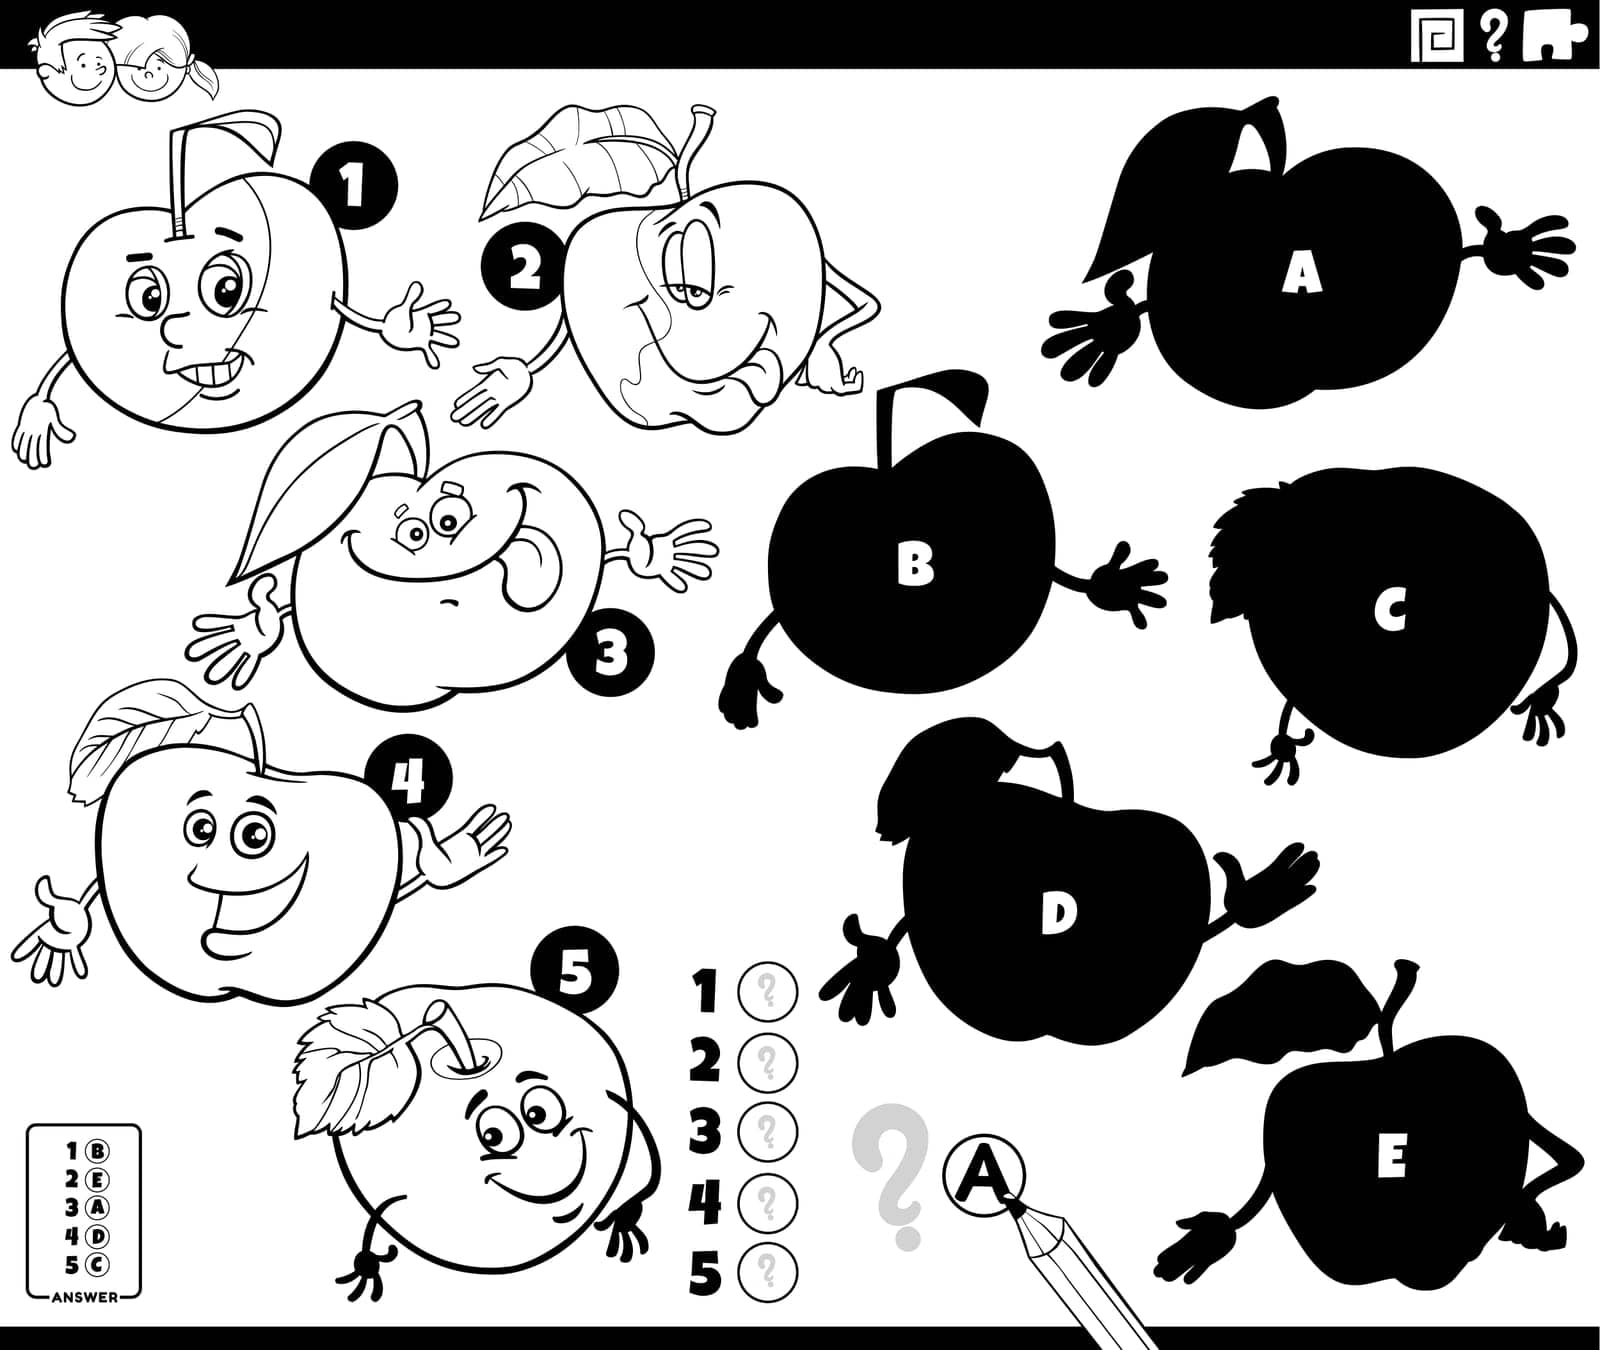 shadows game with cartoon apple characters coloring page by izakowski